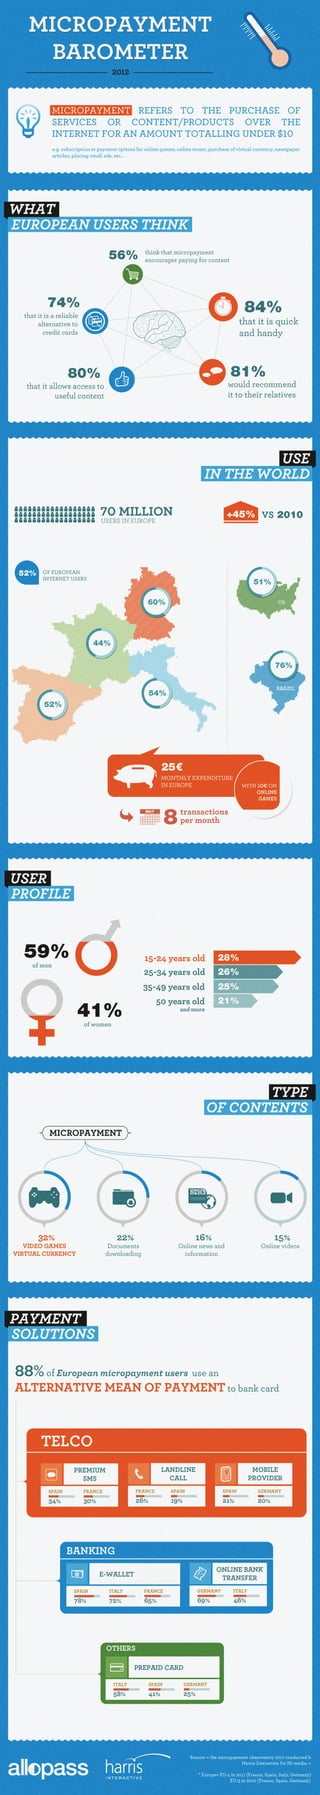 HiMedia micropayment barometer infograhic 2012